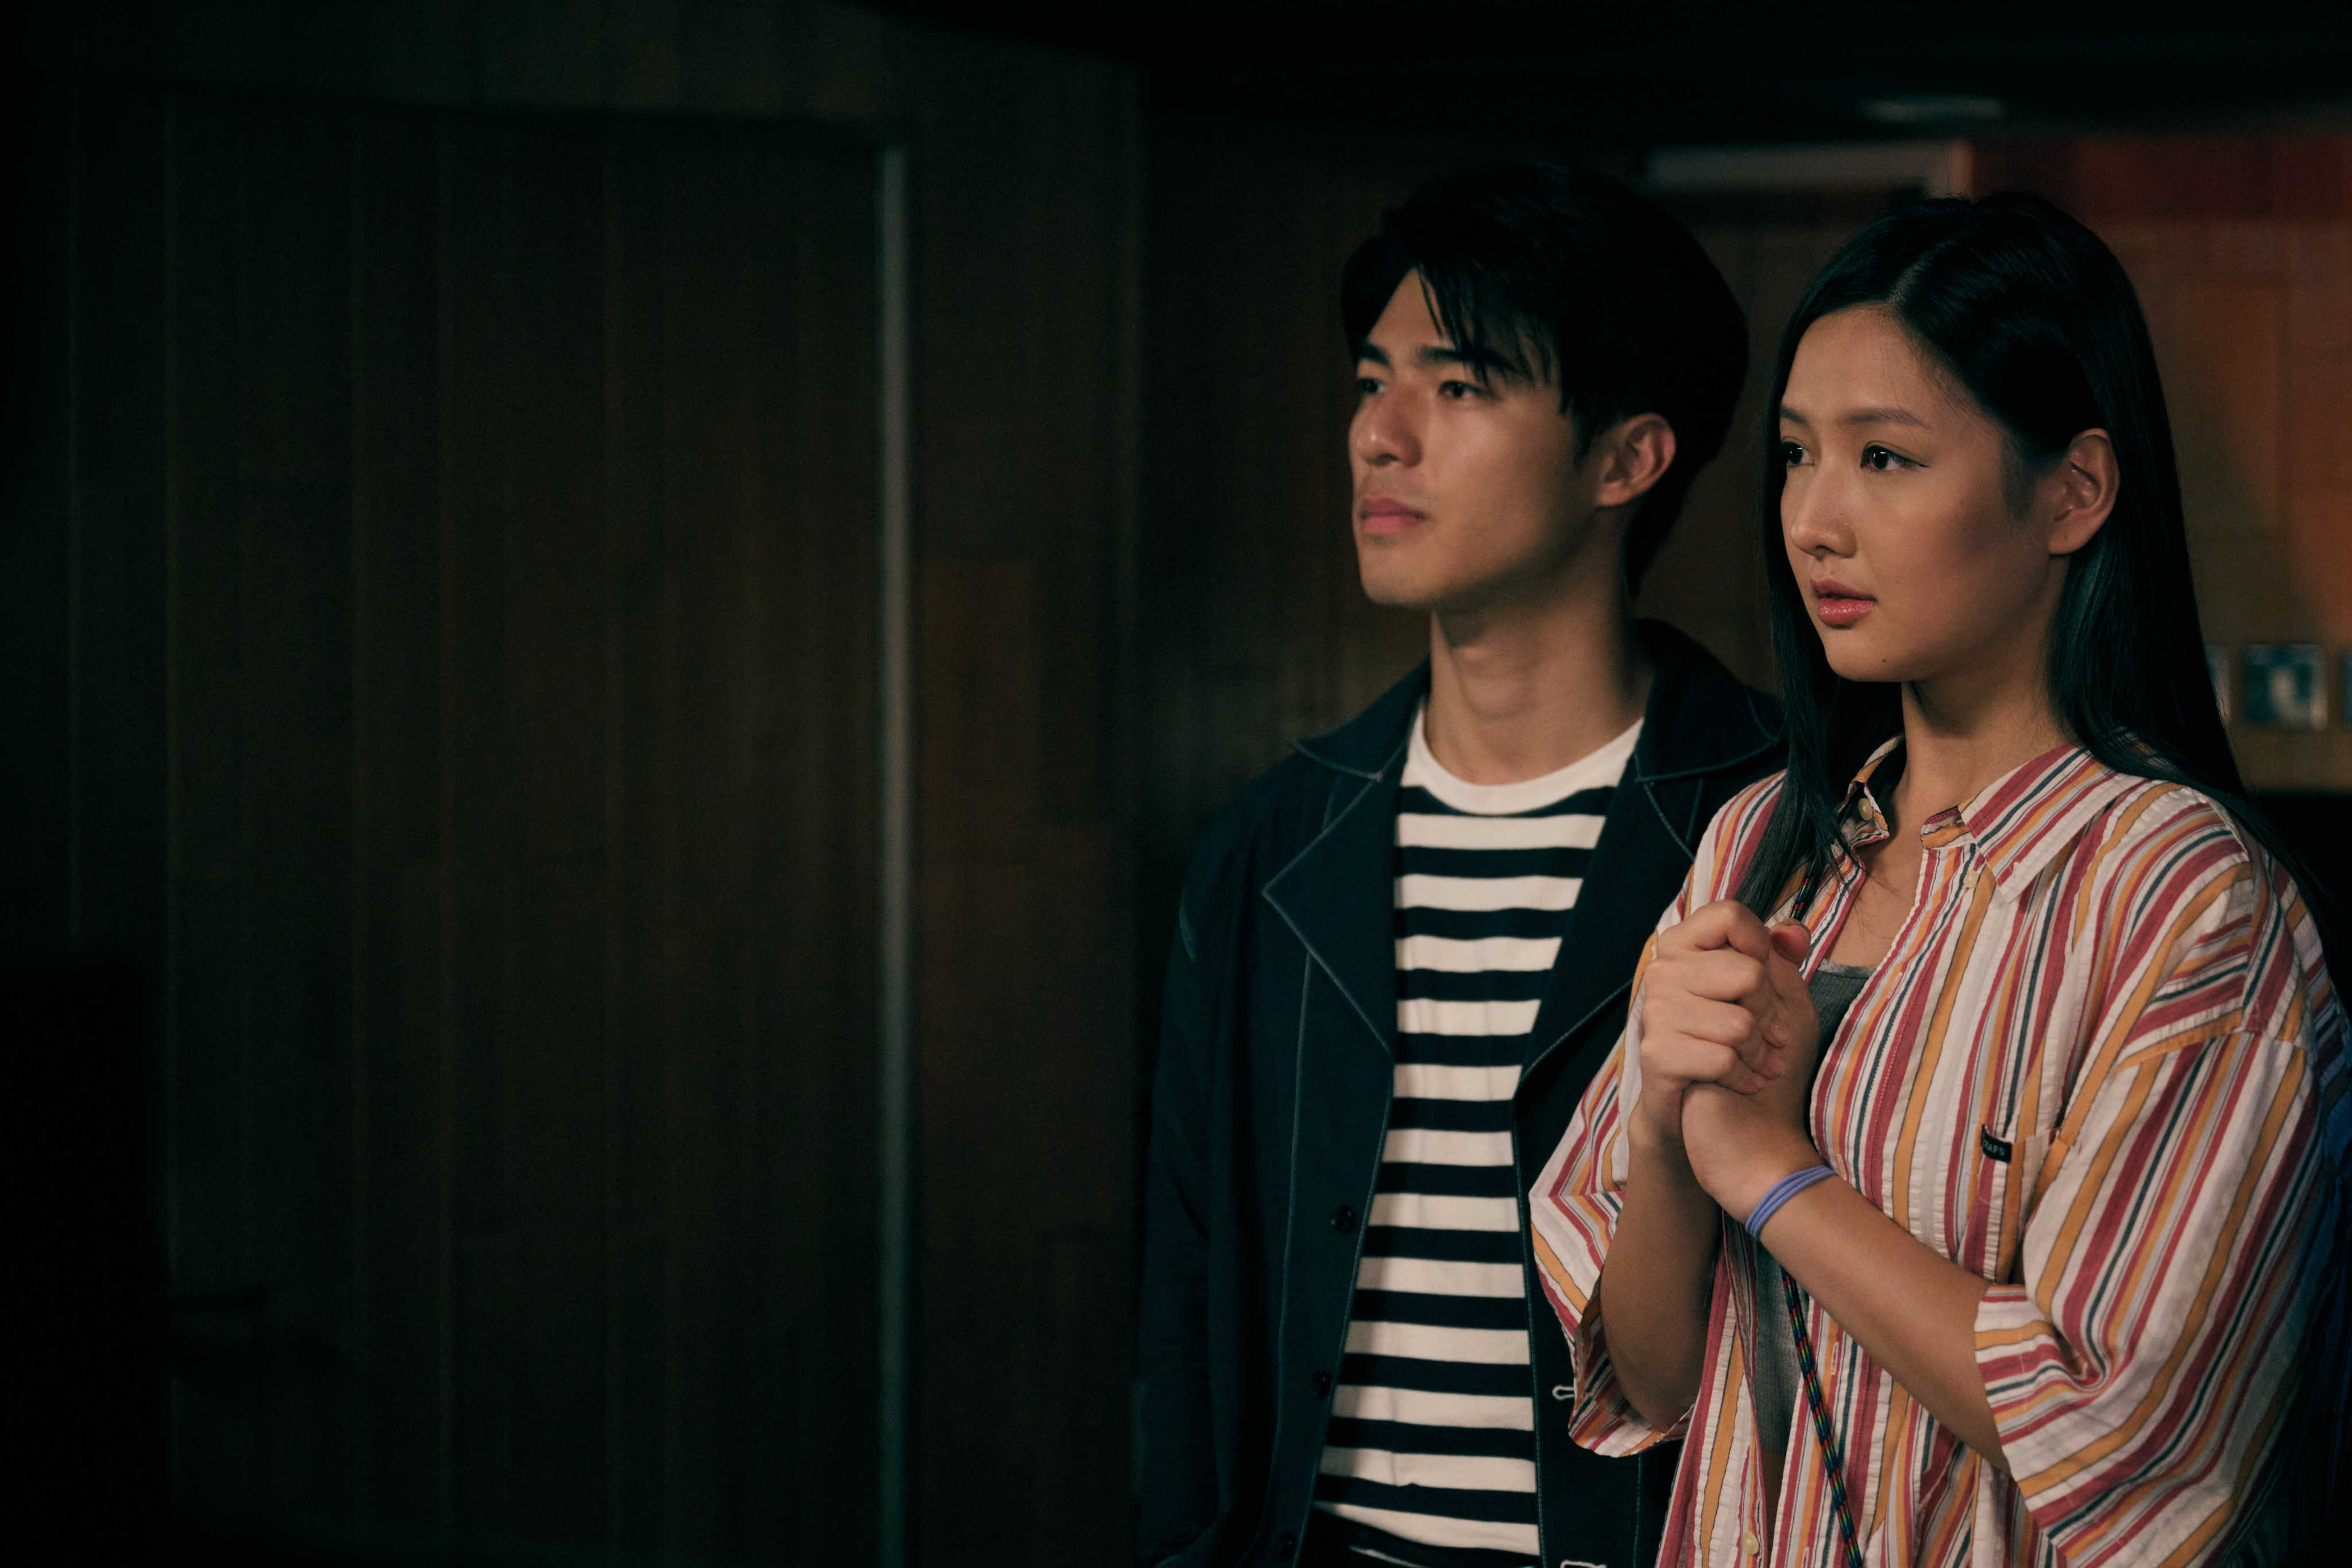 Edward Chen (left) and Mandy Tam in a still from “Love at First Lie”.